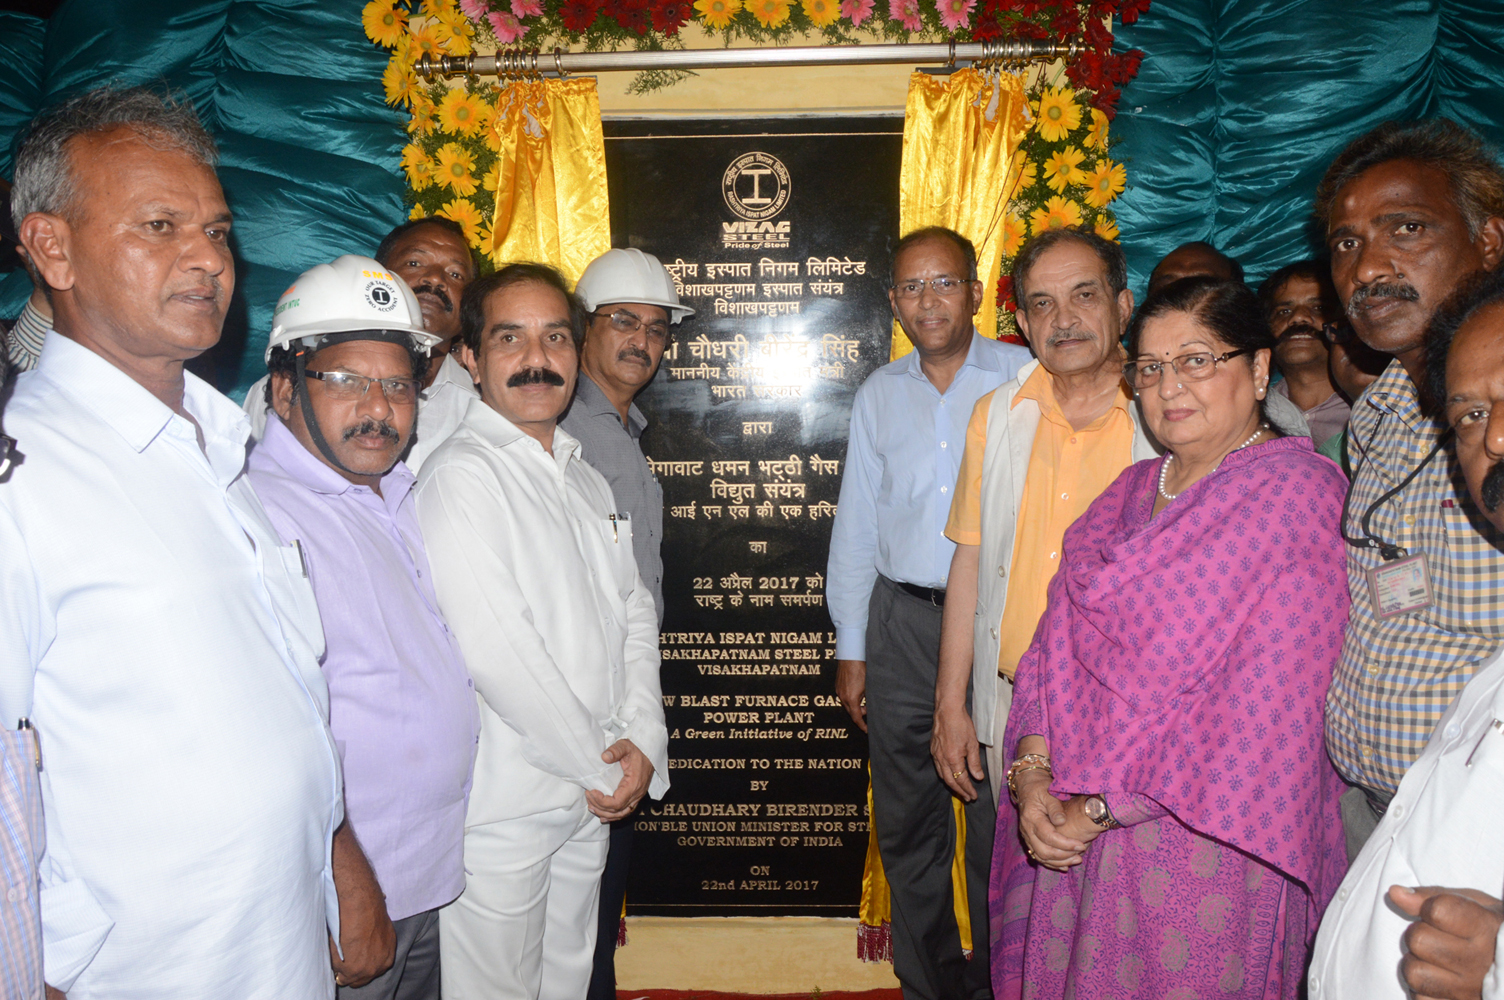 Chaudhary Birender Singh Honble Union Minister of Steel dedicates 120 MW Power Plant to the Nation